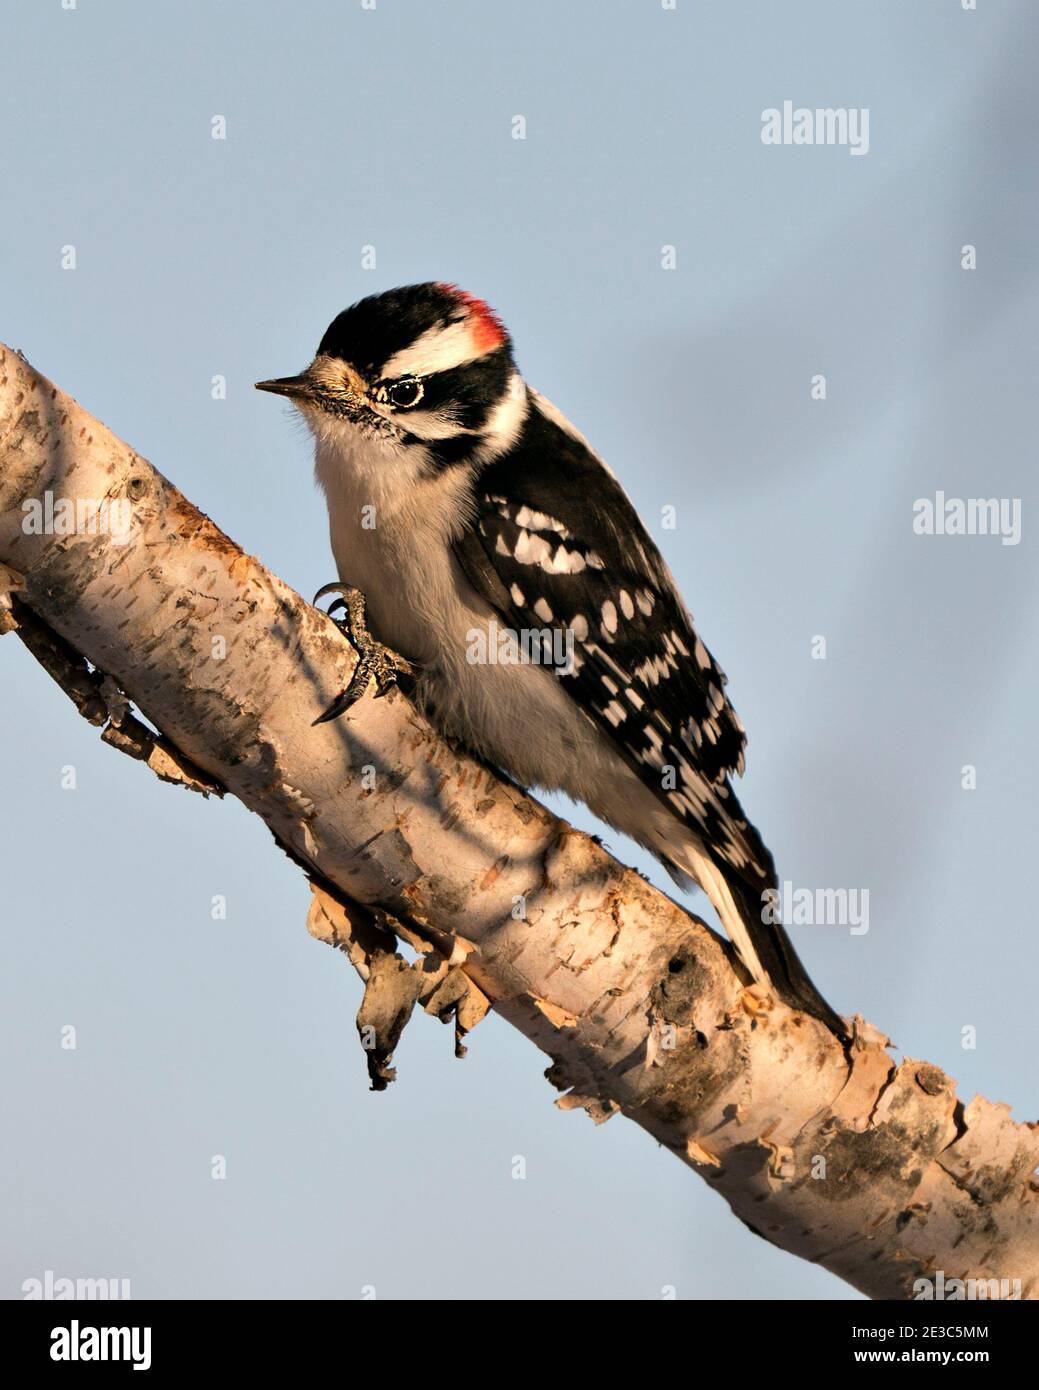 Woodpecker perched displaying white and black colour feather plumage, in its environment and habitat in the forest with a blur background. Image. Stock Photo